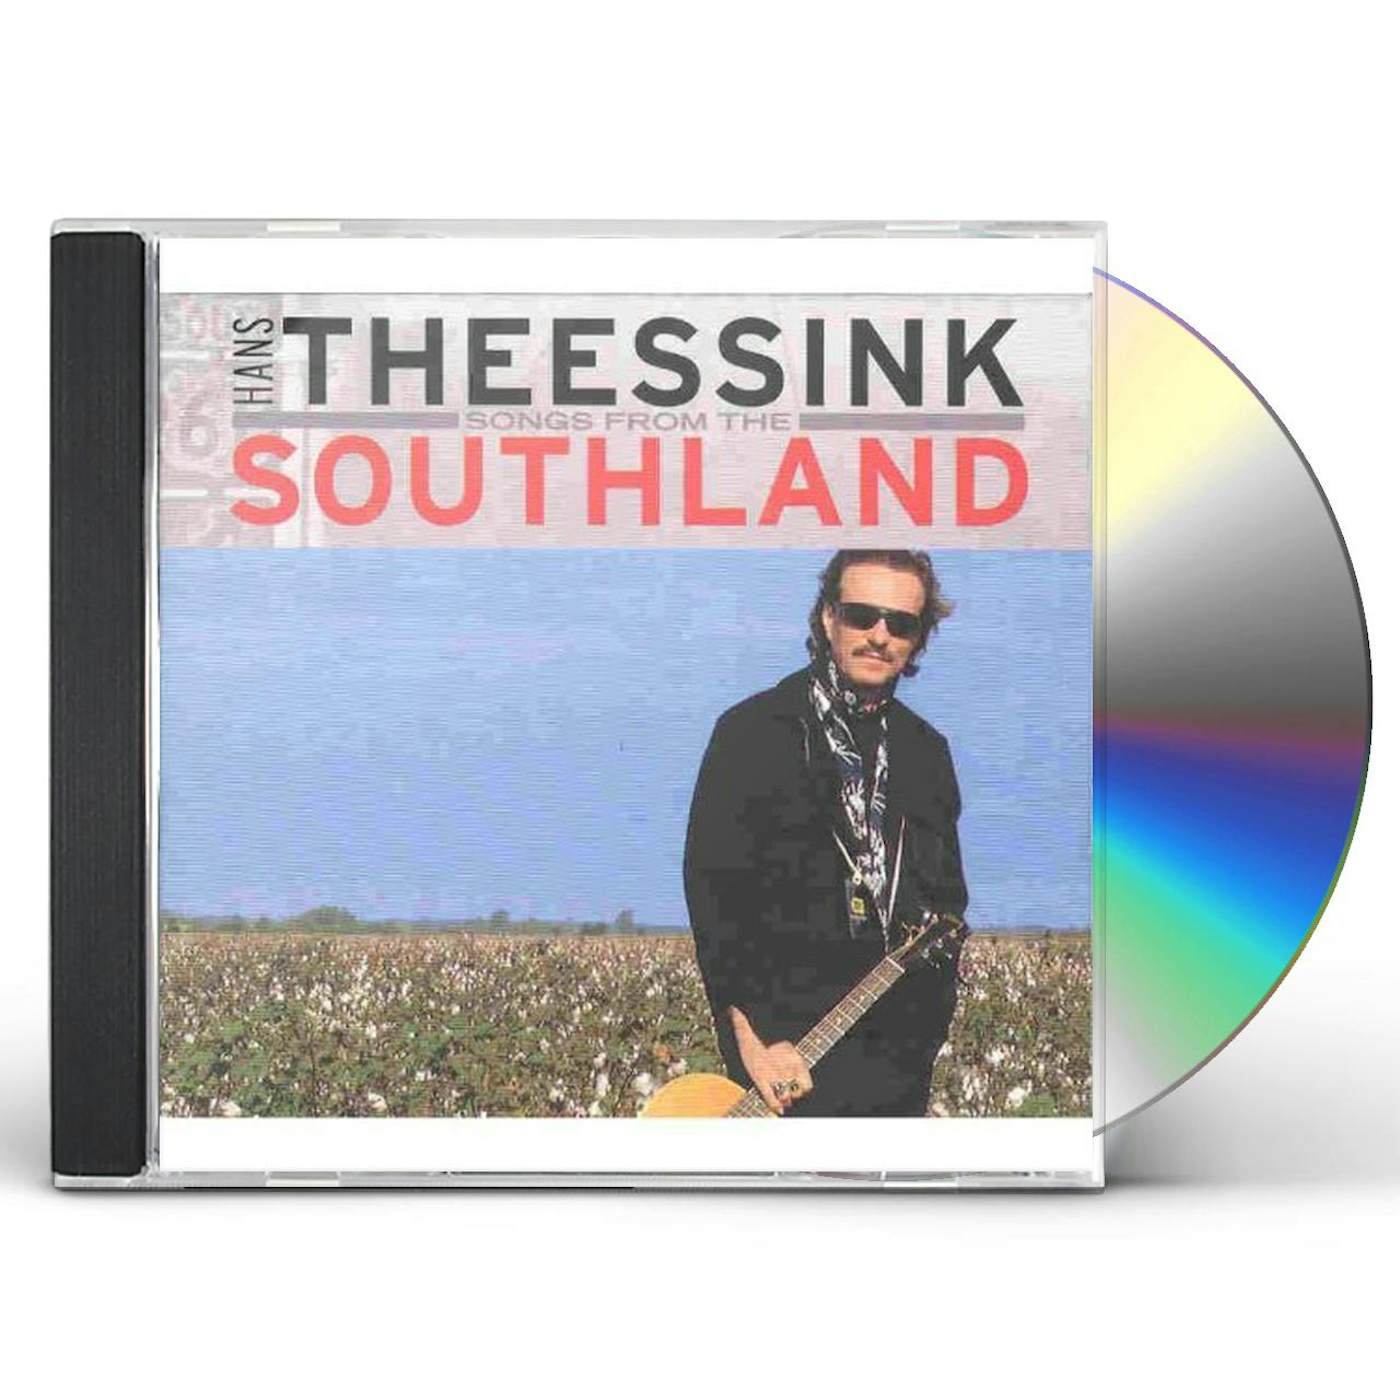 Hans Theessink SONGS FROM THE SOUTHLAND CD